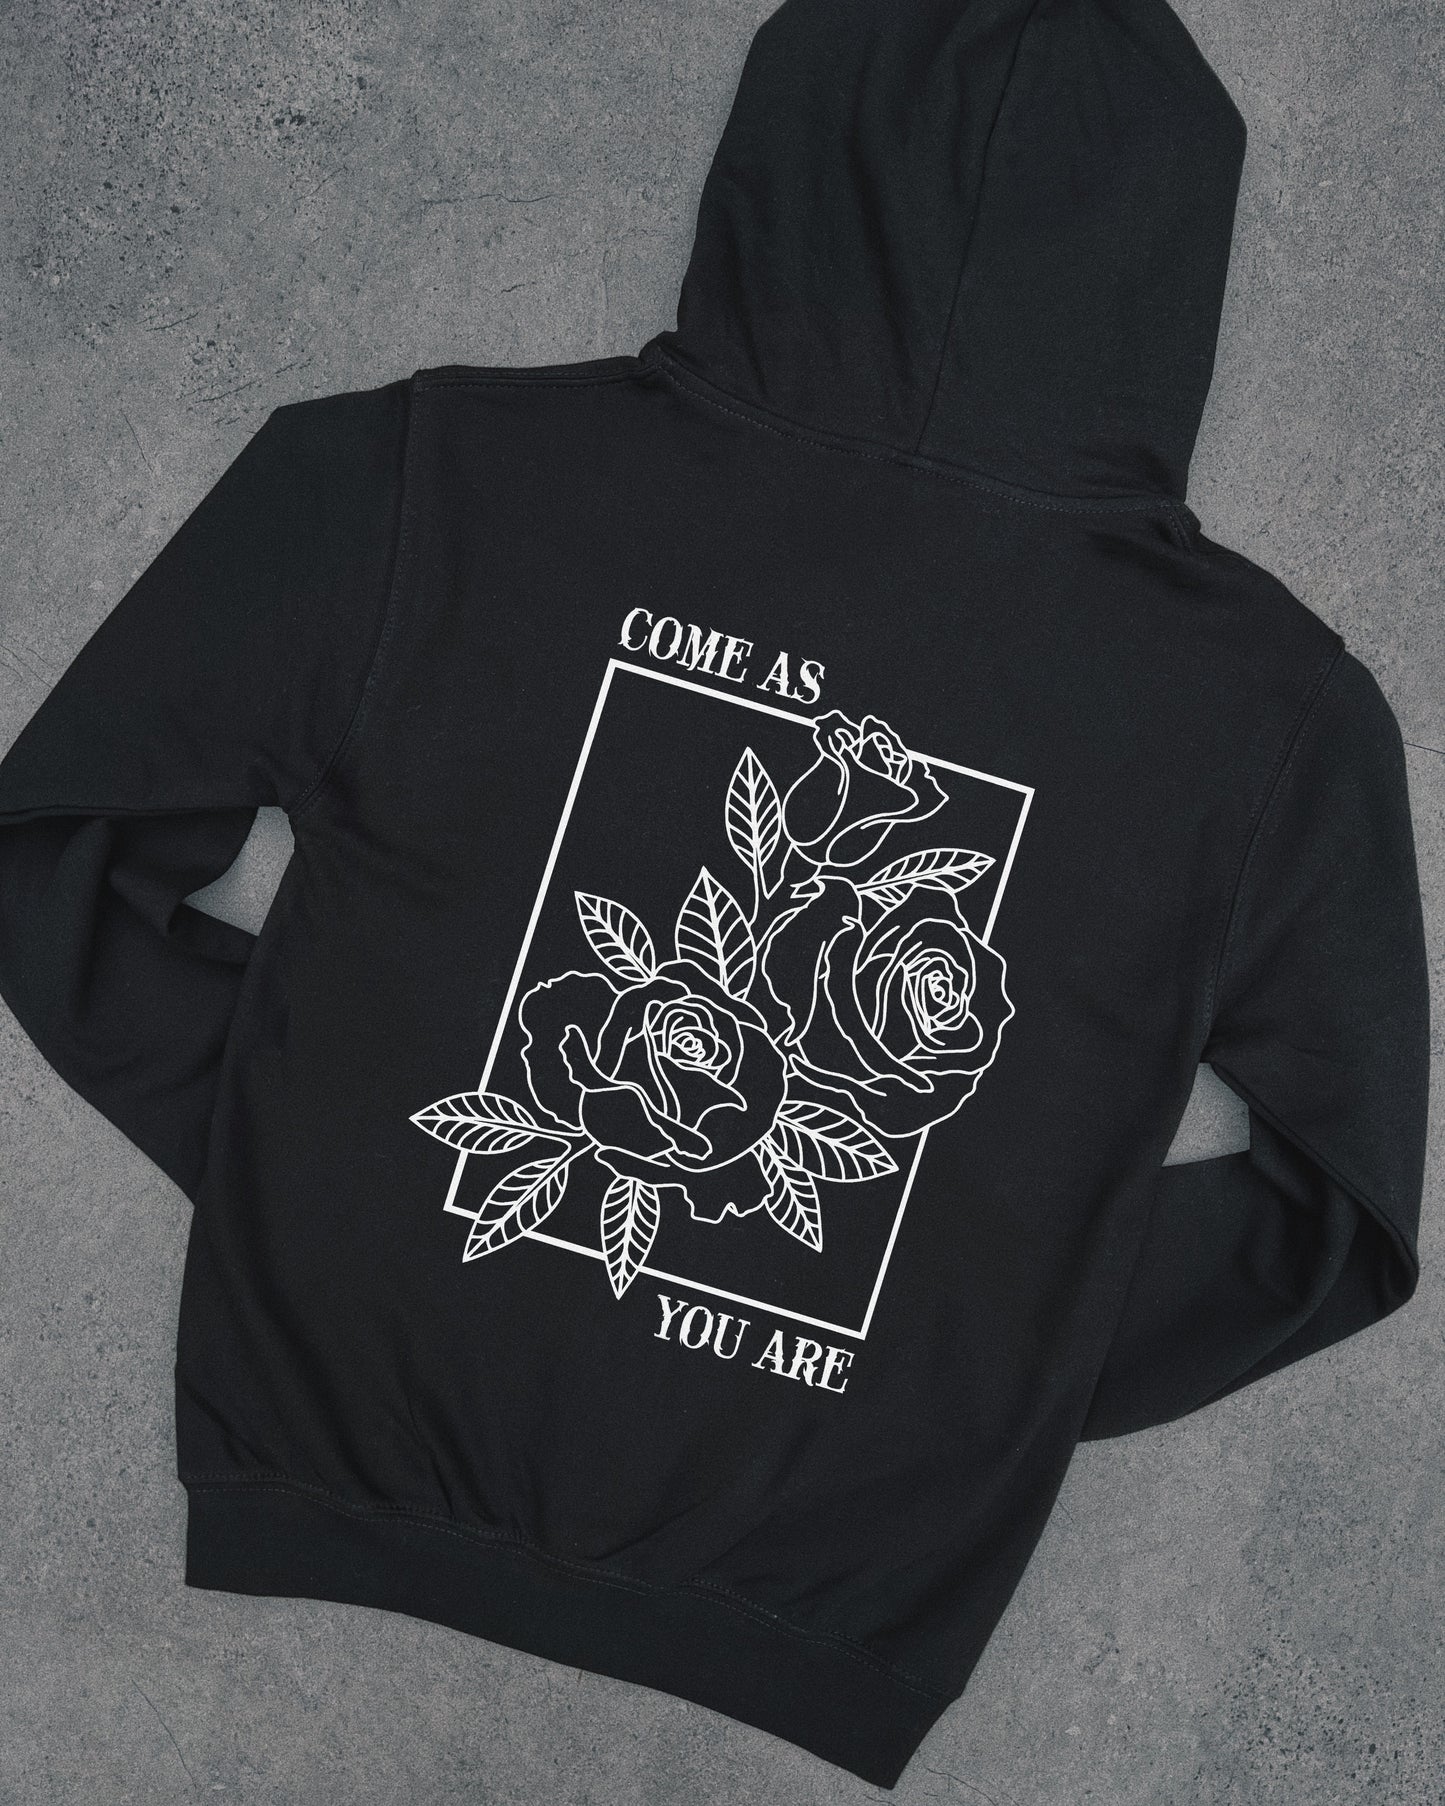 Come as you are - Zip Hoodie